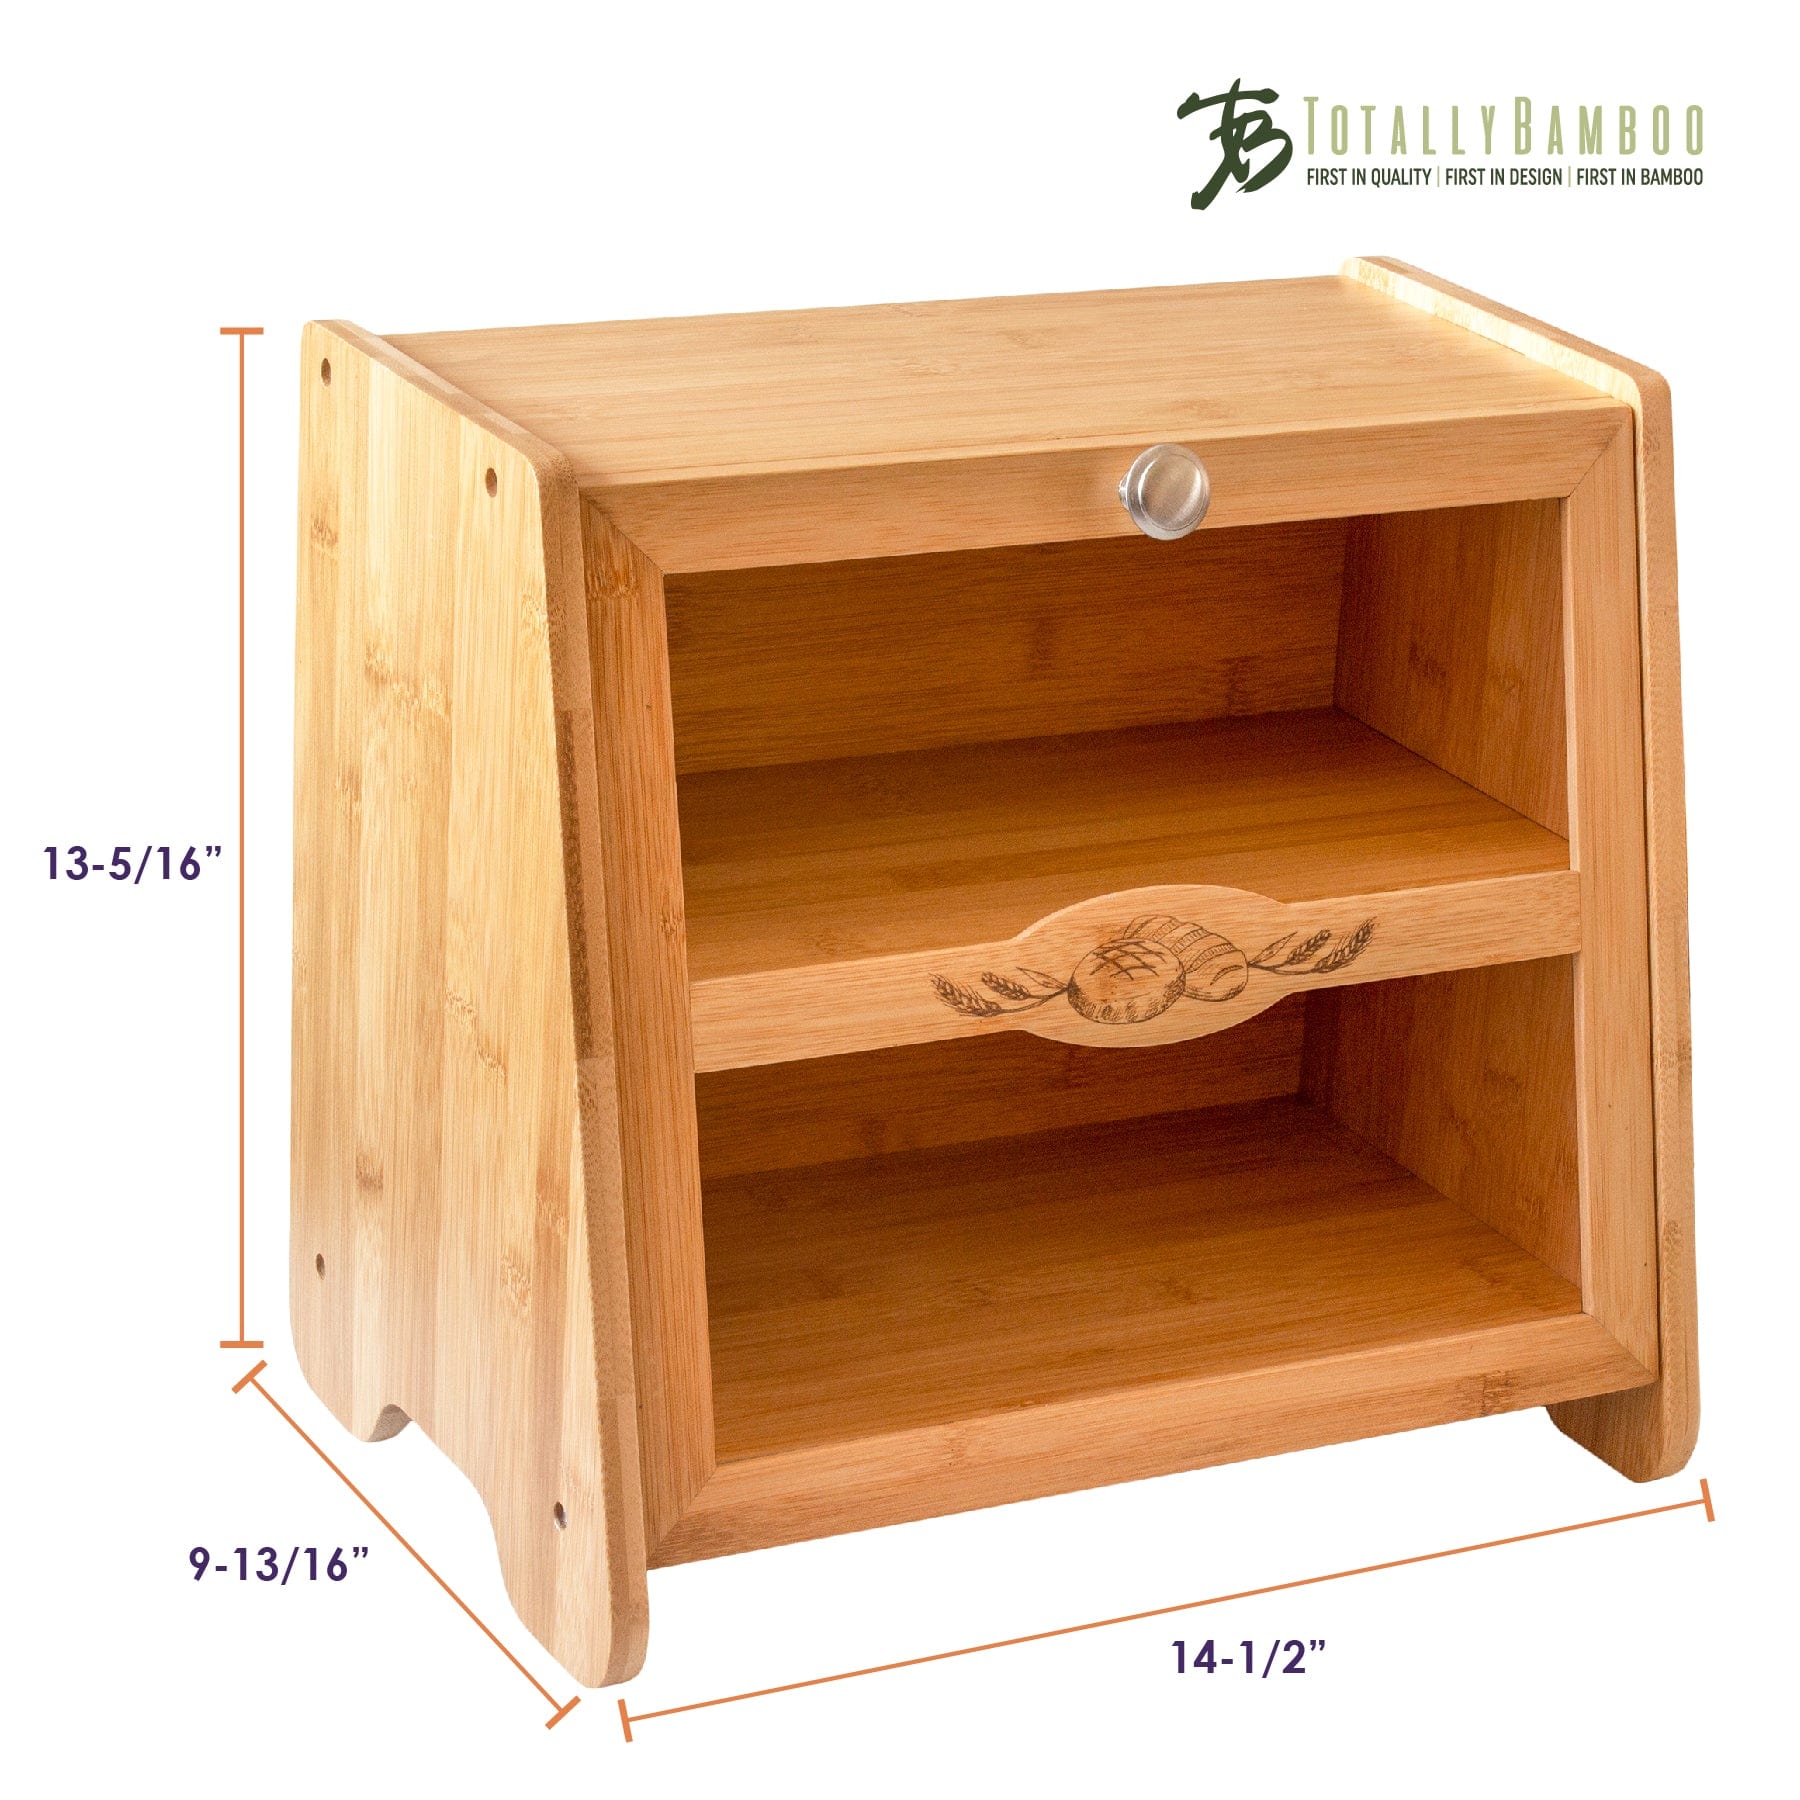 Natural Bamboo Bread Box with Cutting Board